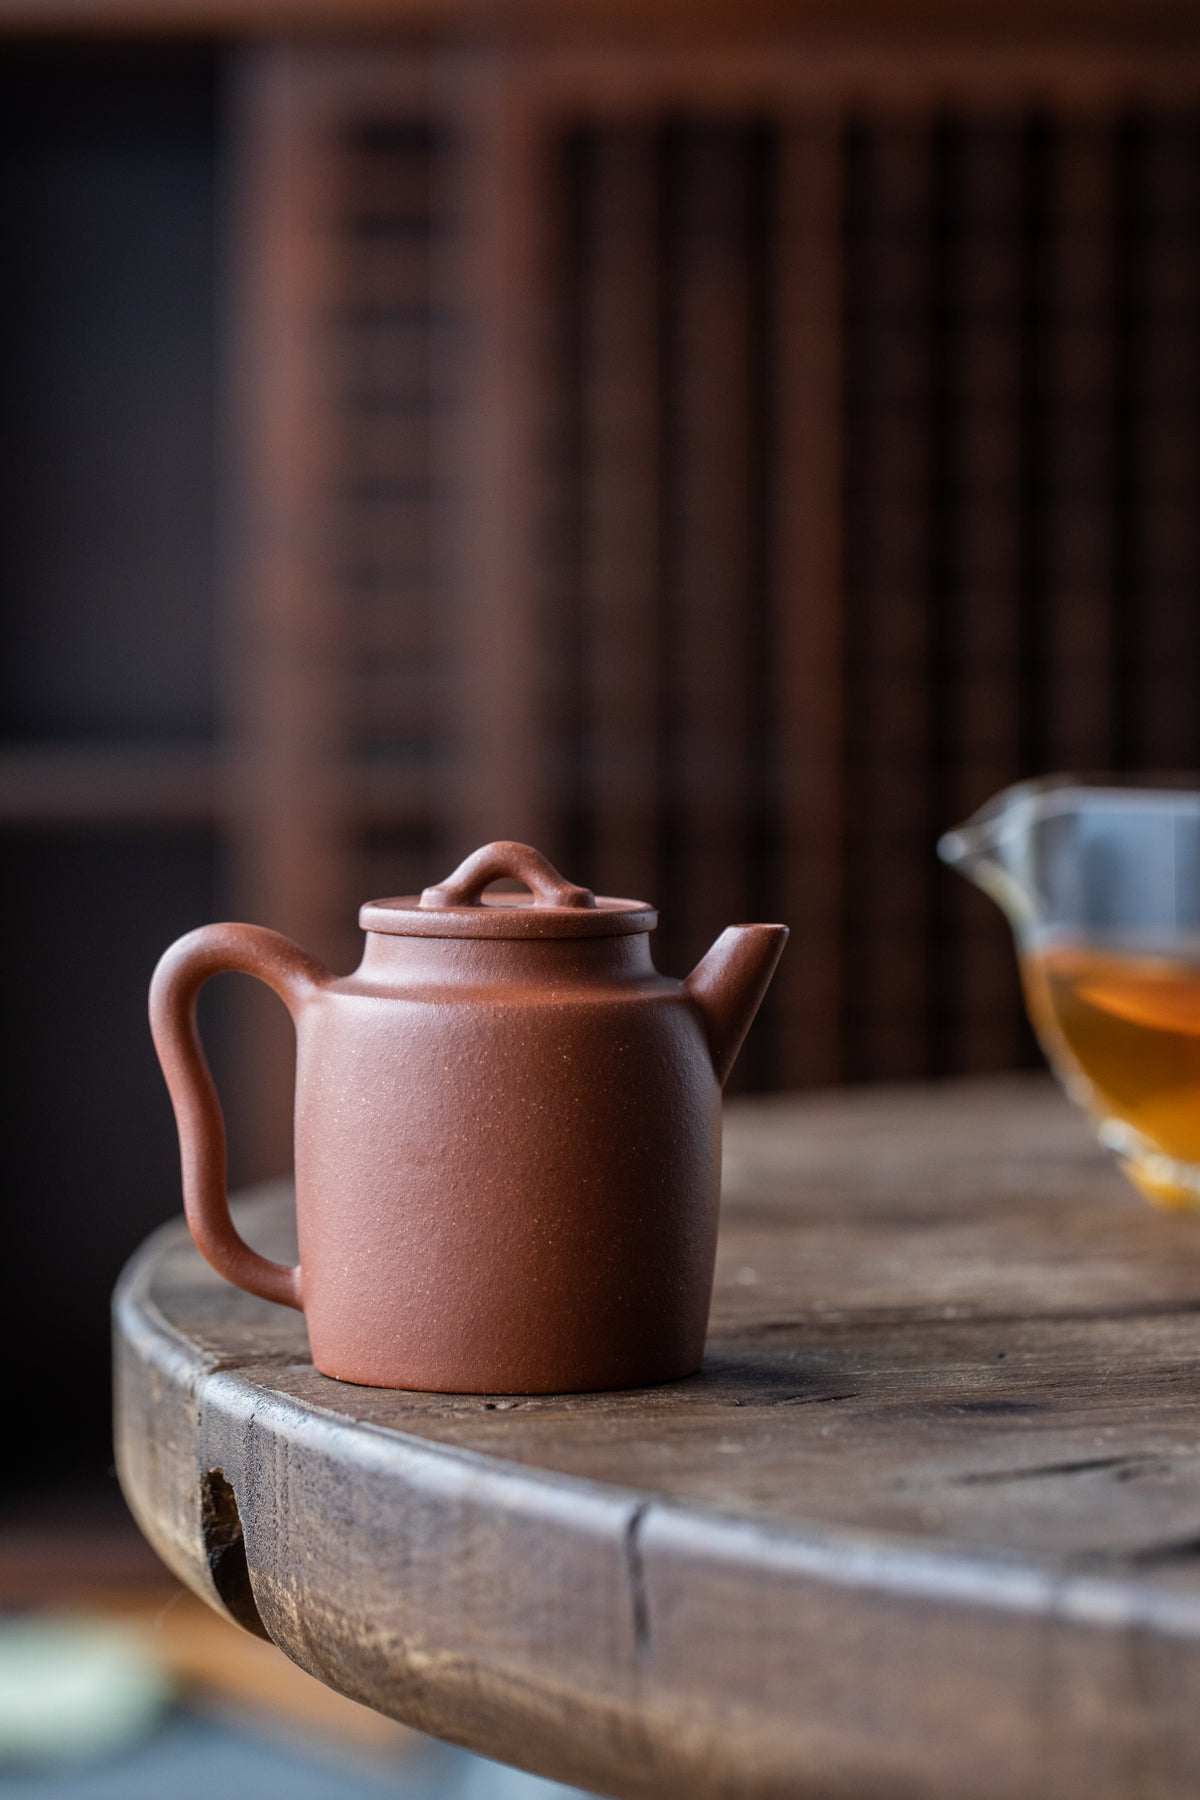 a dark ceramic teapot on a wooden table